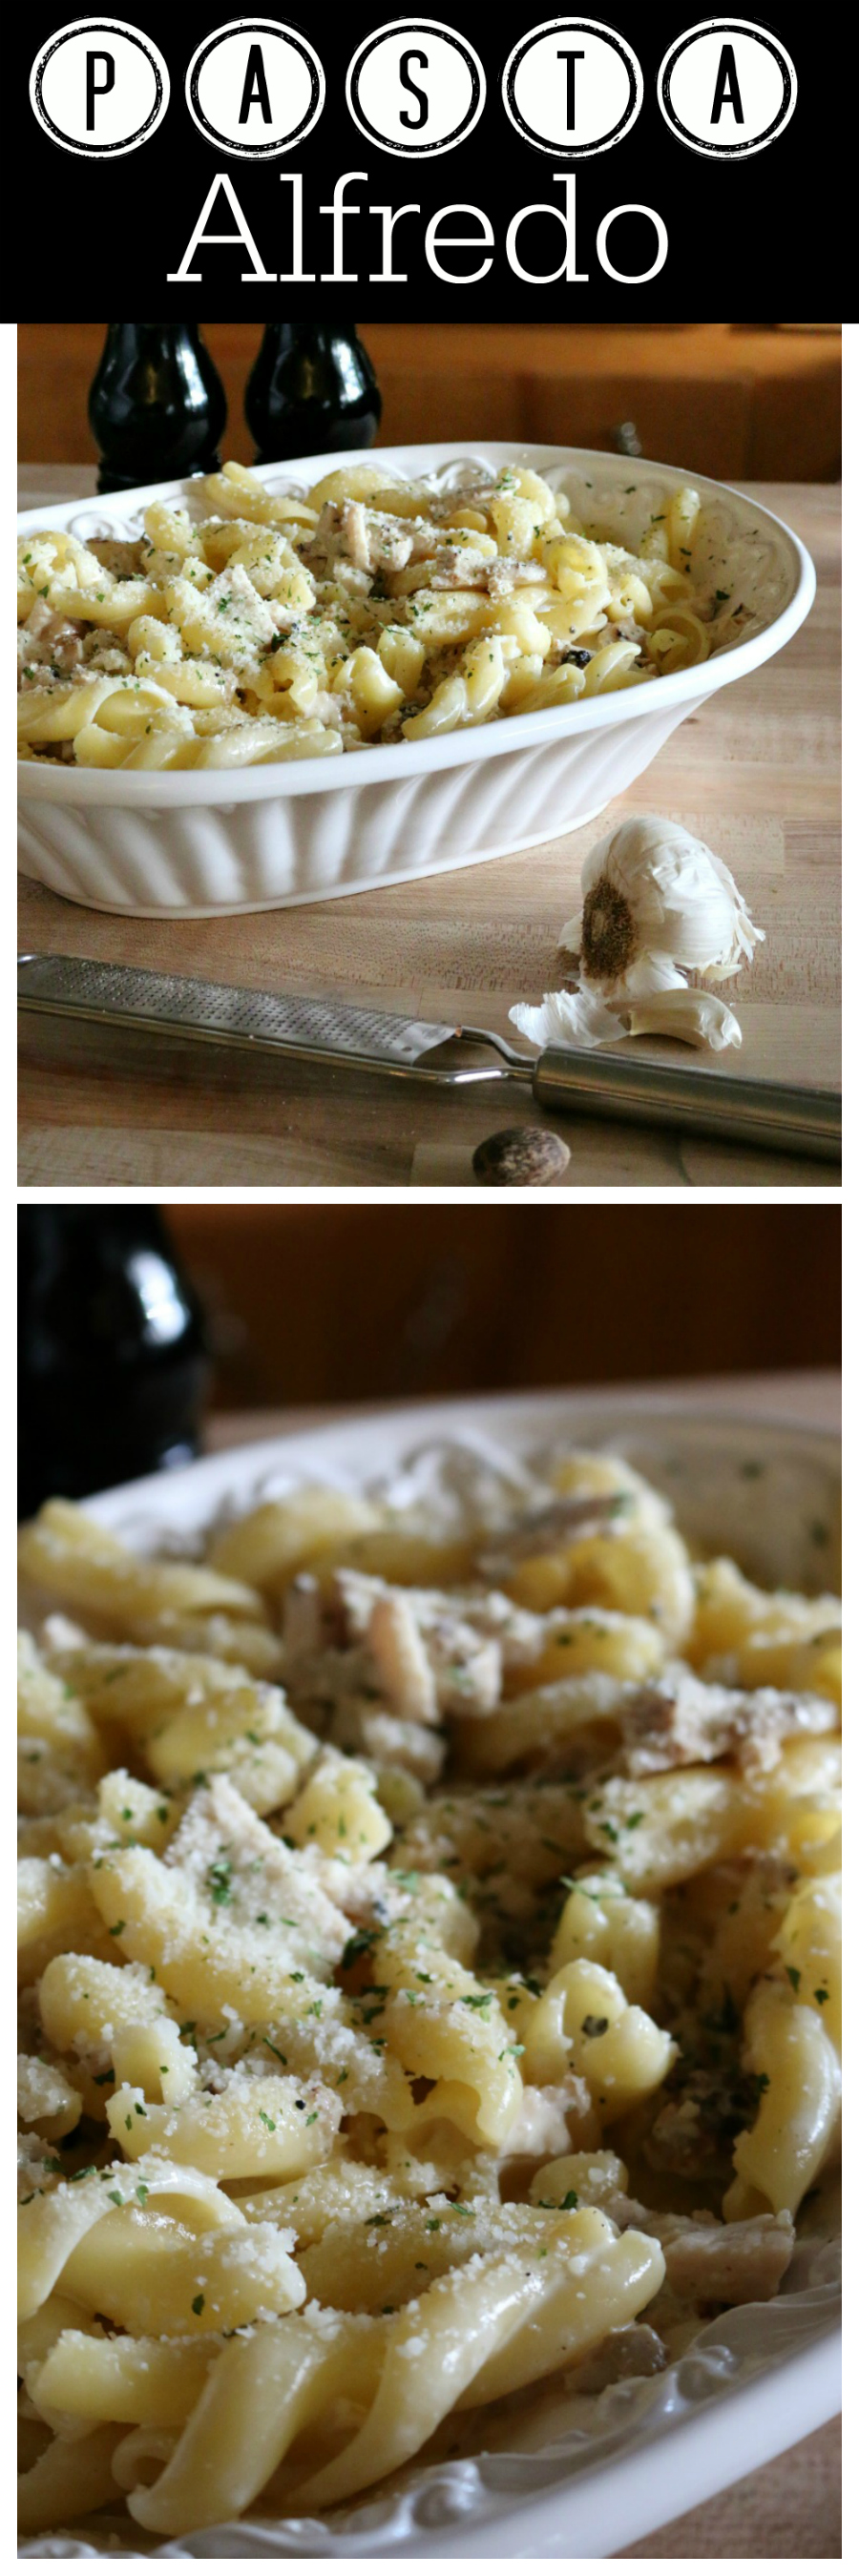 Pasta Alfredo with Chicken and Garlic   | CeceliasGoodStuff.com | Good Food for Good People